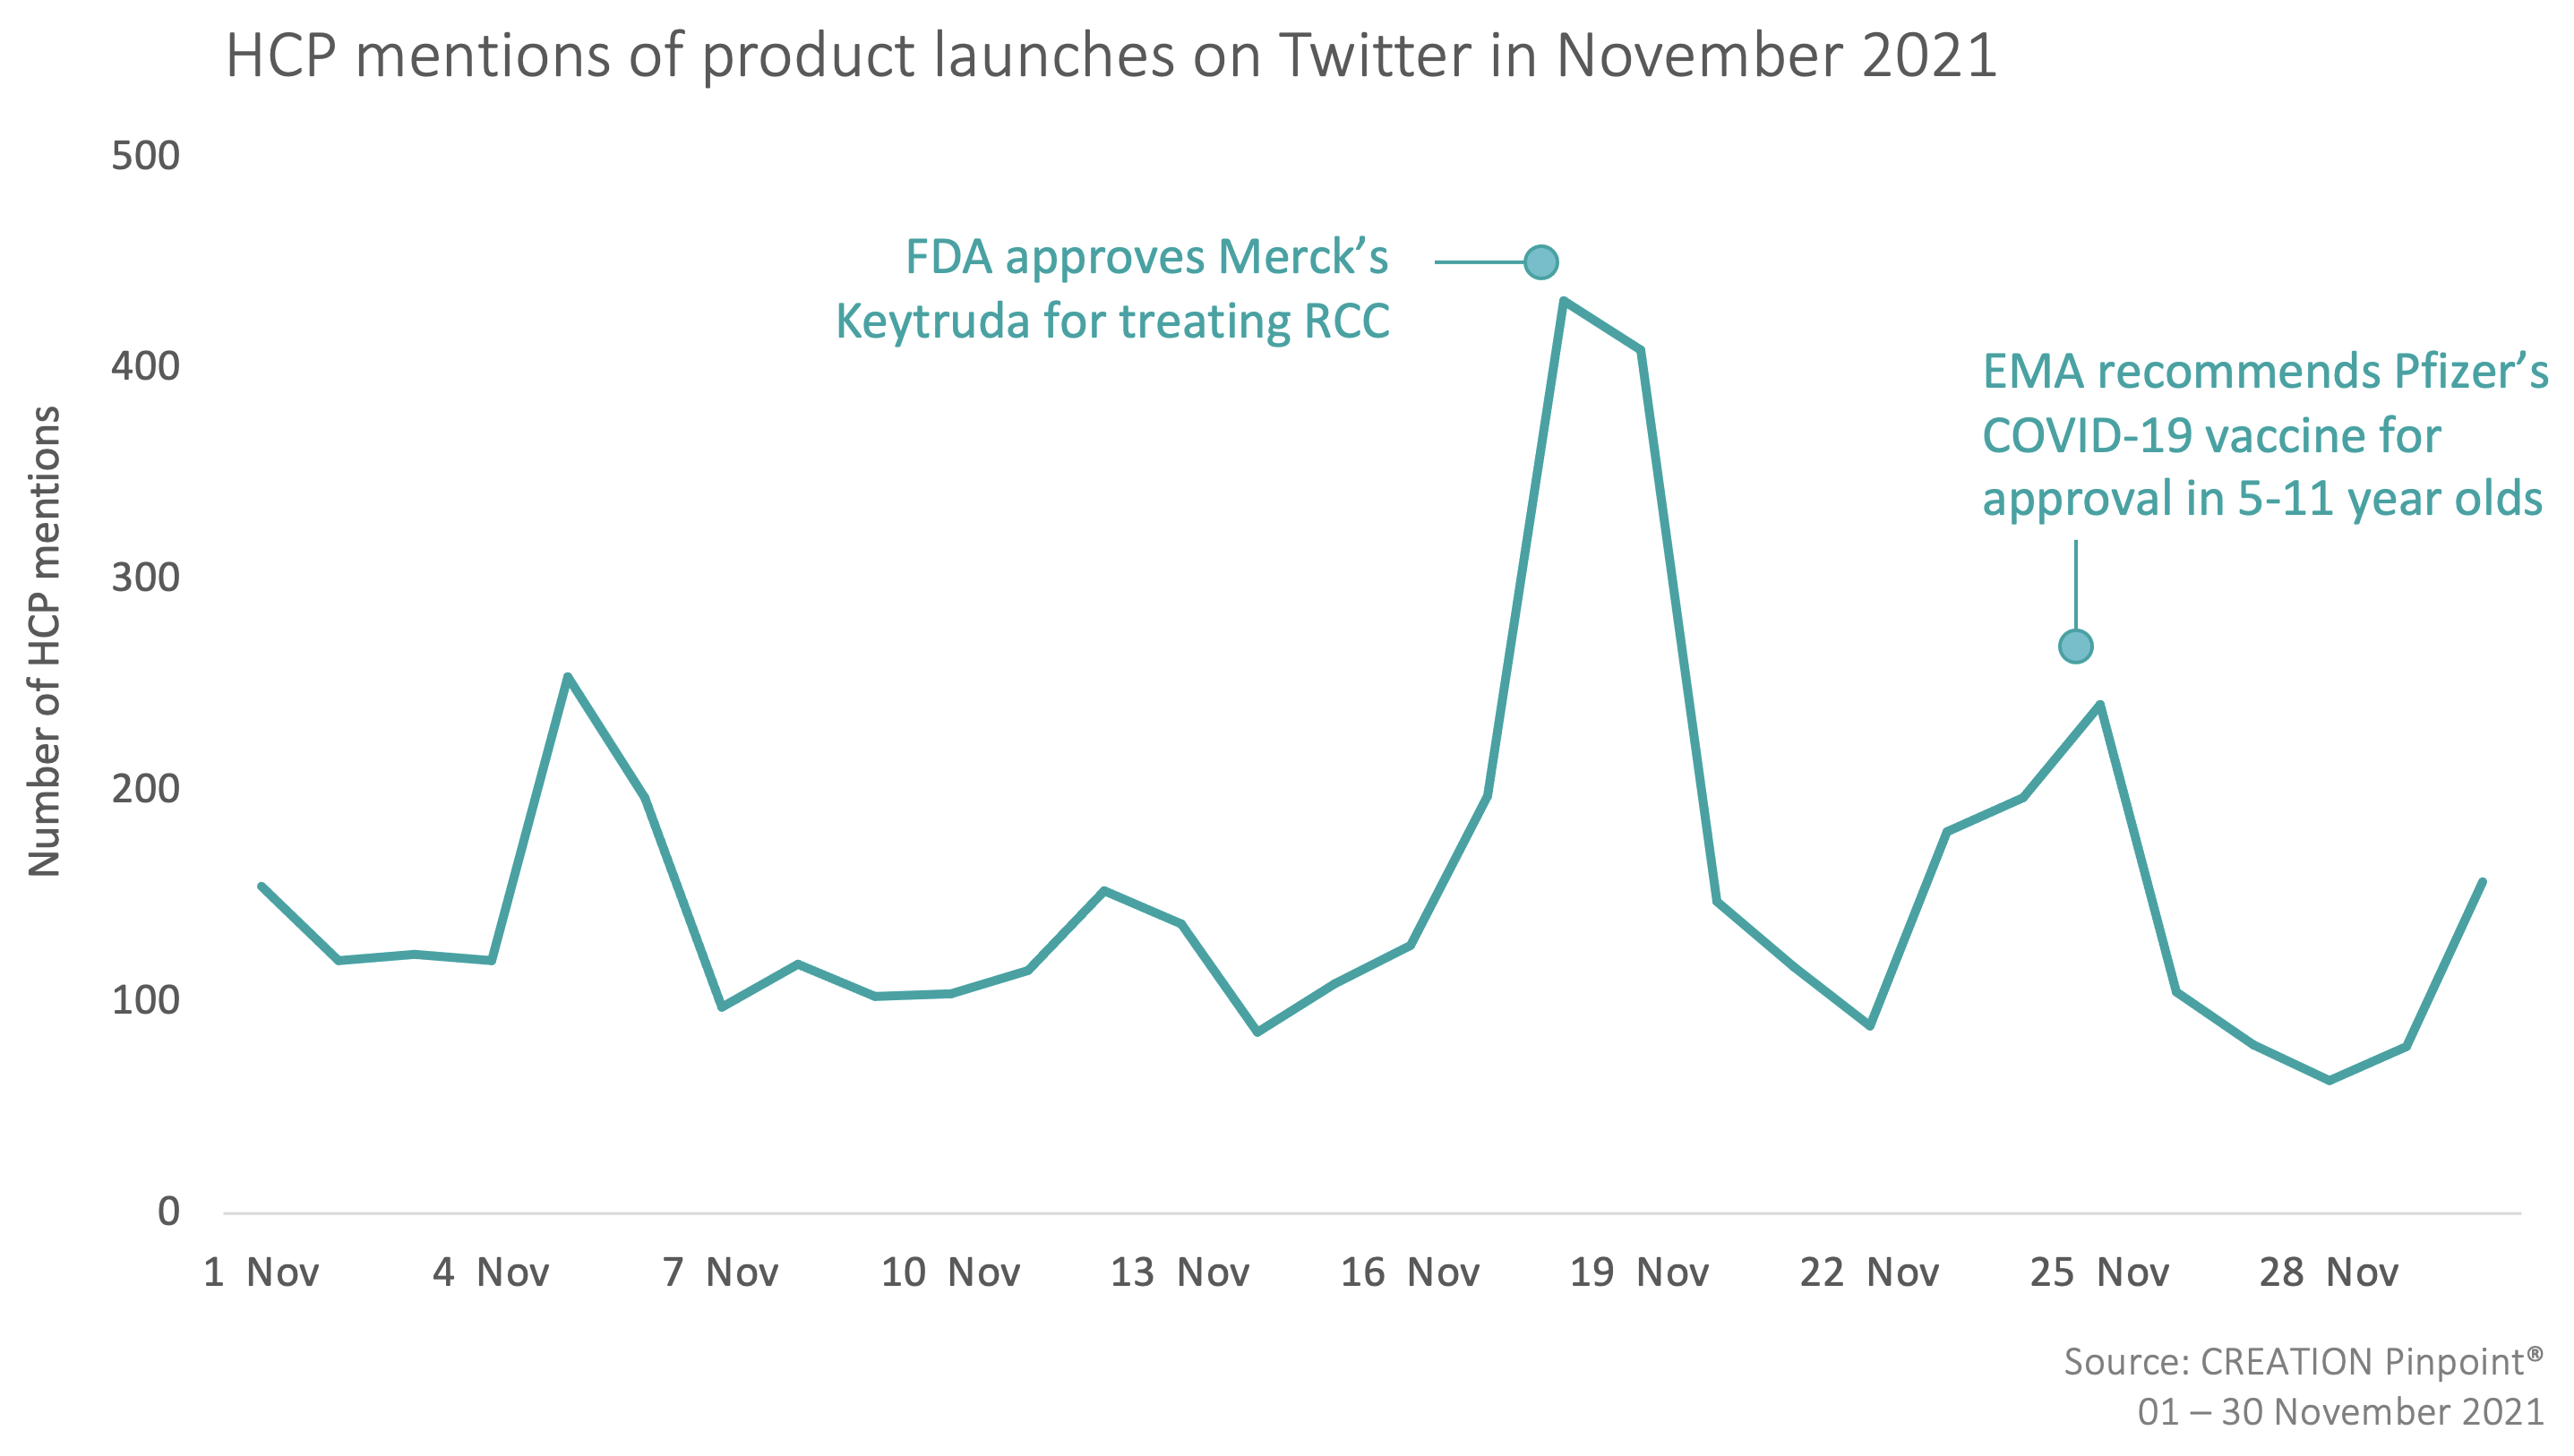 Image of a graph showing HCP mentions of product launches on twitter in November 2021